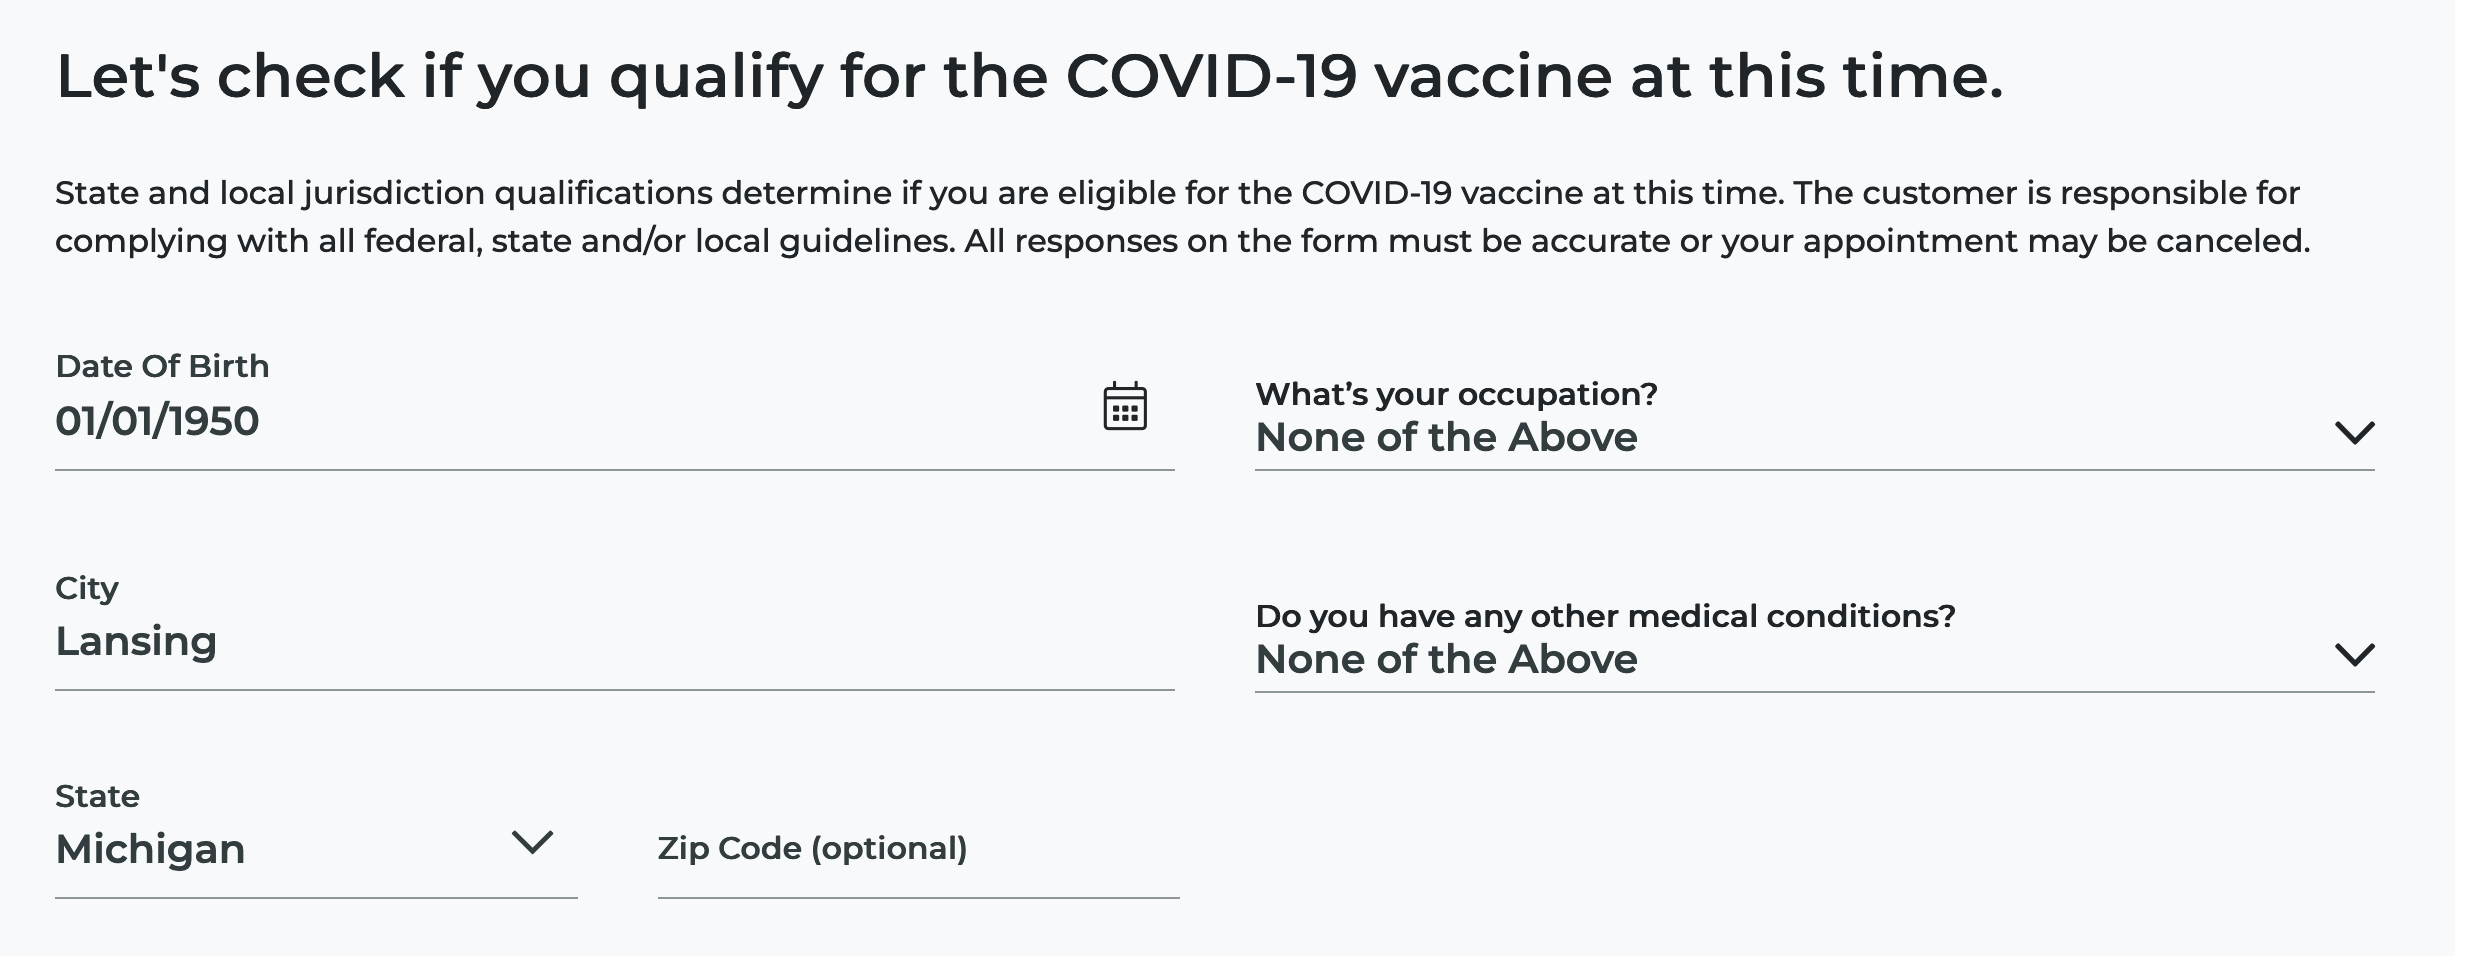 Screenshot from Rite Aid qualifier showing fields Date of Birth, City, State, Zip Code (optional), What's your occupation? Do you have any other medical conditions?